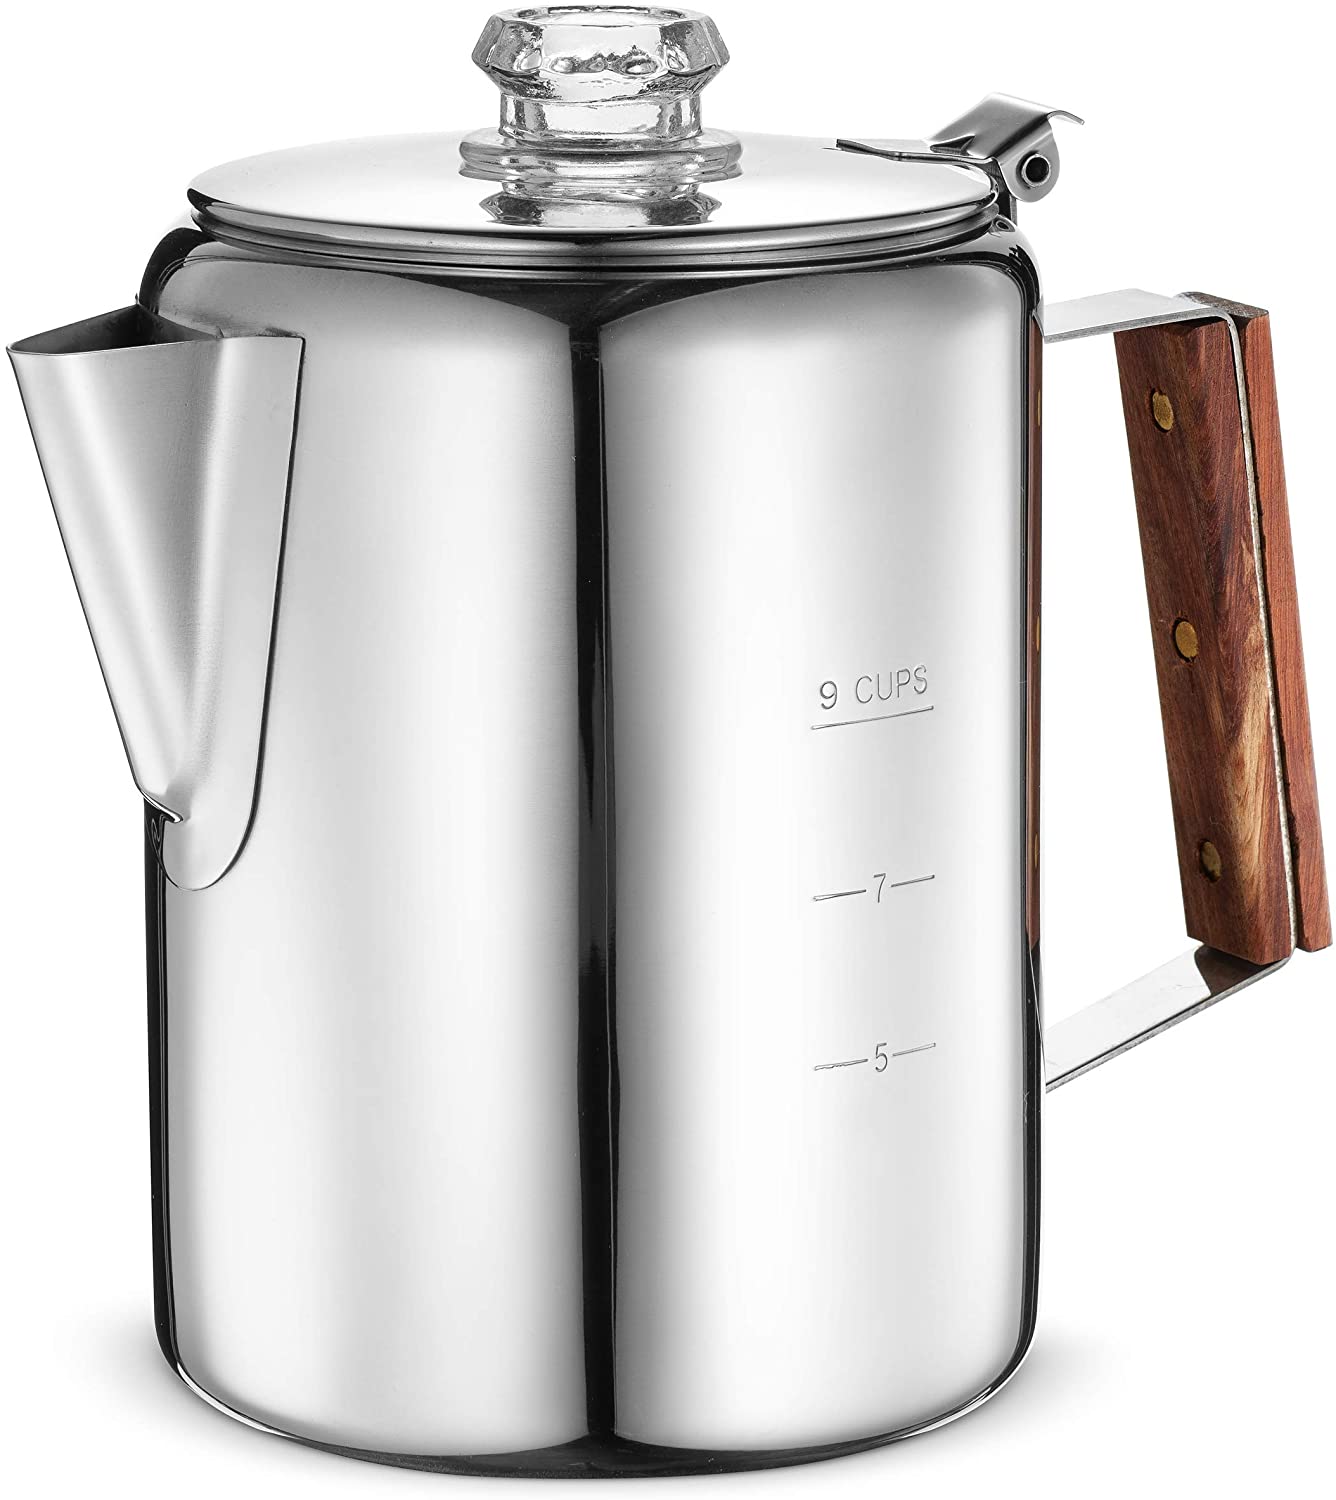 Eurolux Durable Stainless Steel Coffee Percolator, 9-Cup